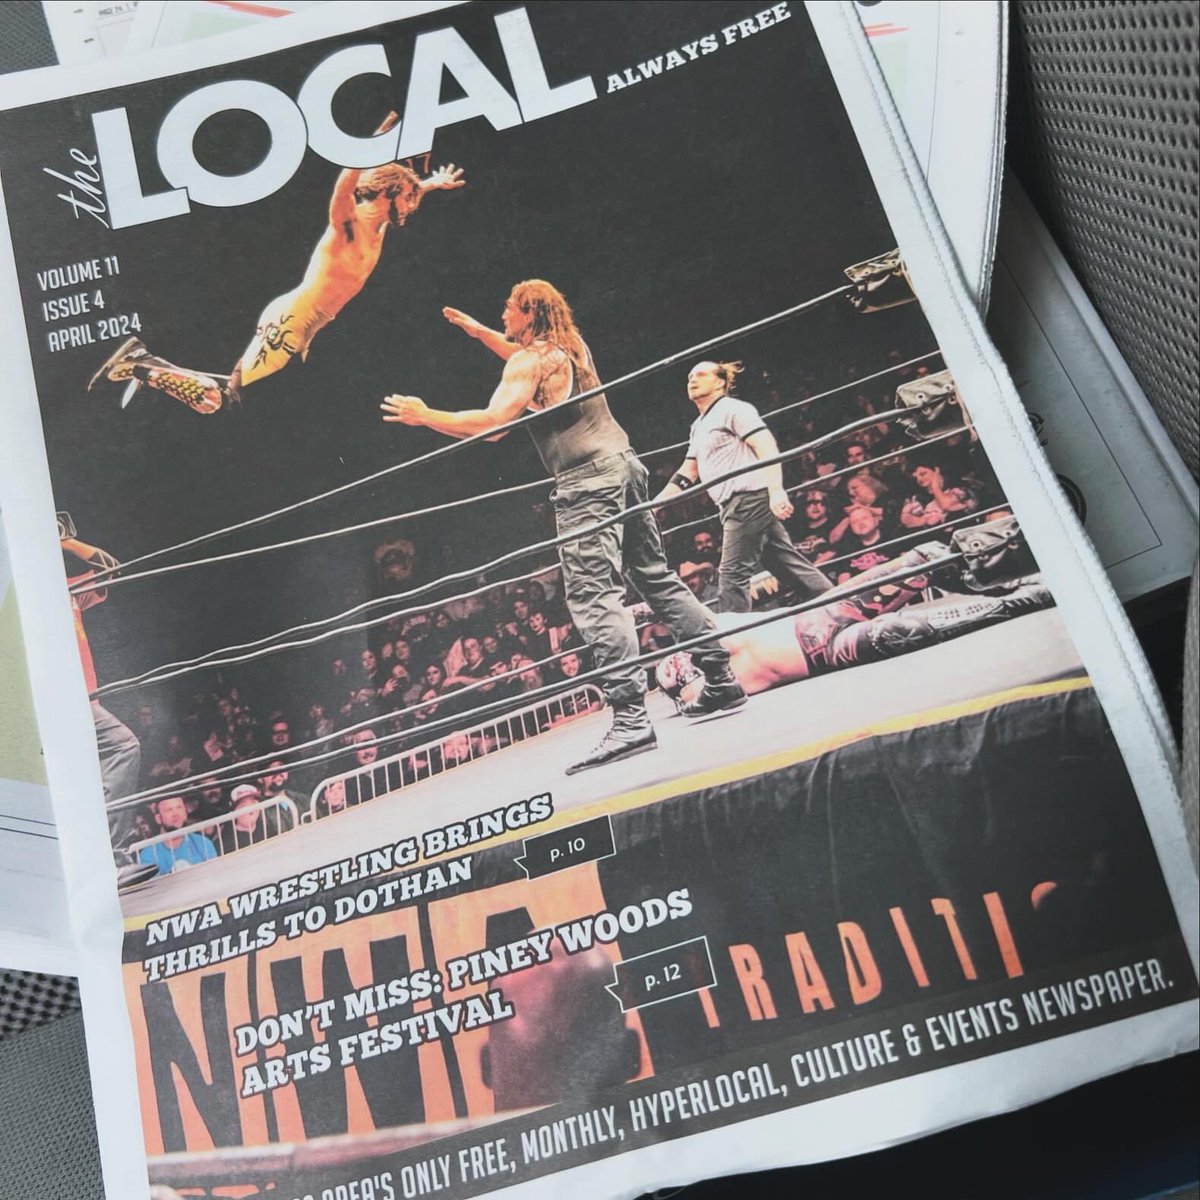 Perfect timing with the season premiere of #NWAPowerrr on @TheCW! Get your copy of @WiregrassLocal for free now available all over Dothan! Watch NWA Powerrr for FREE too! thecw.com/shows/nwa-powe…